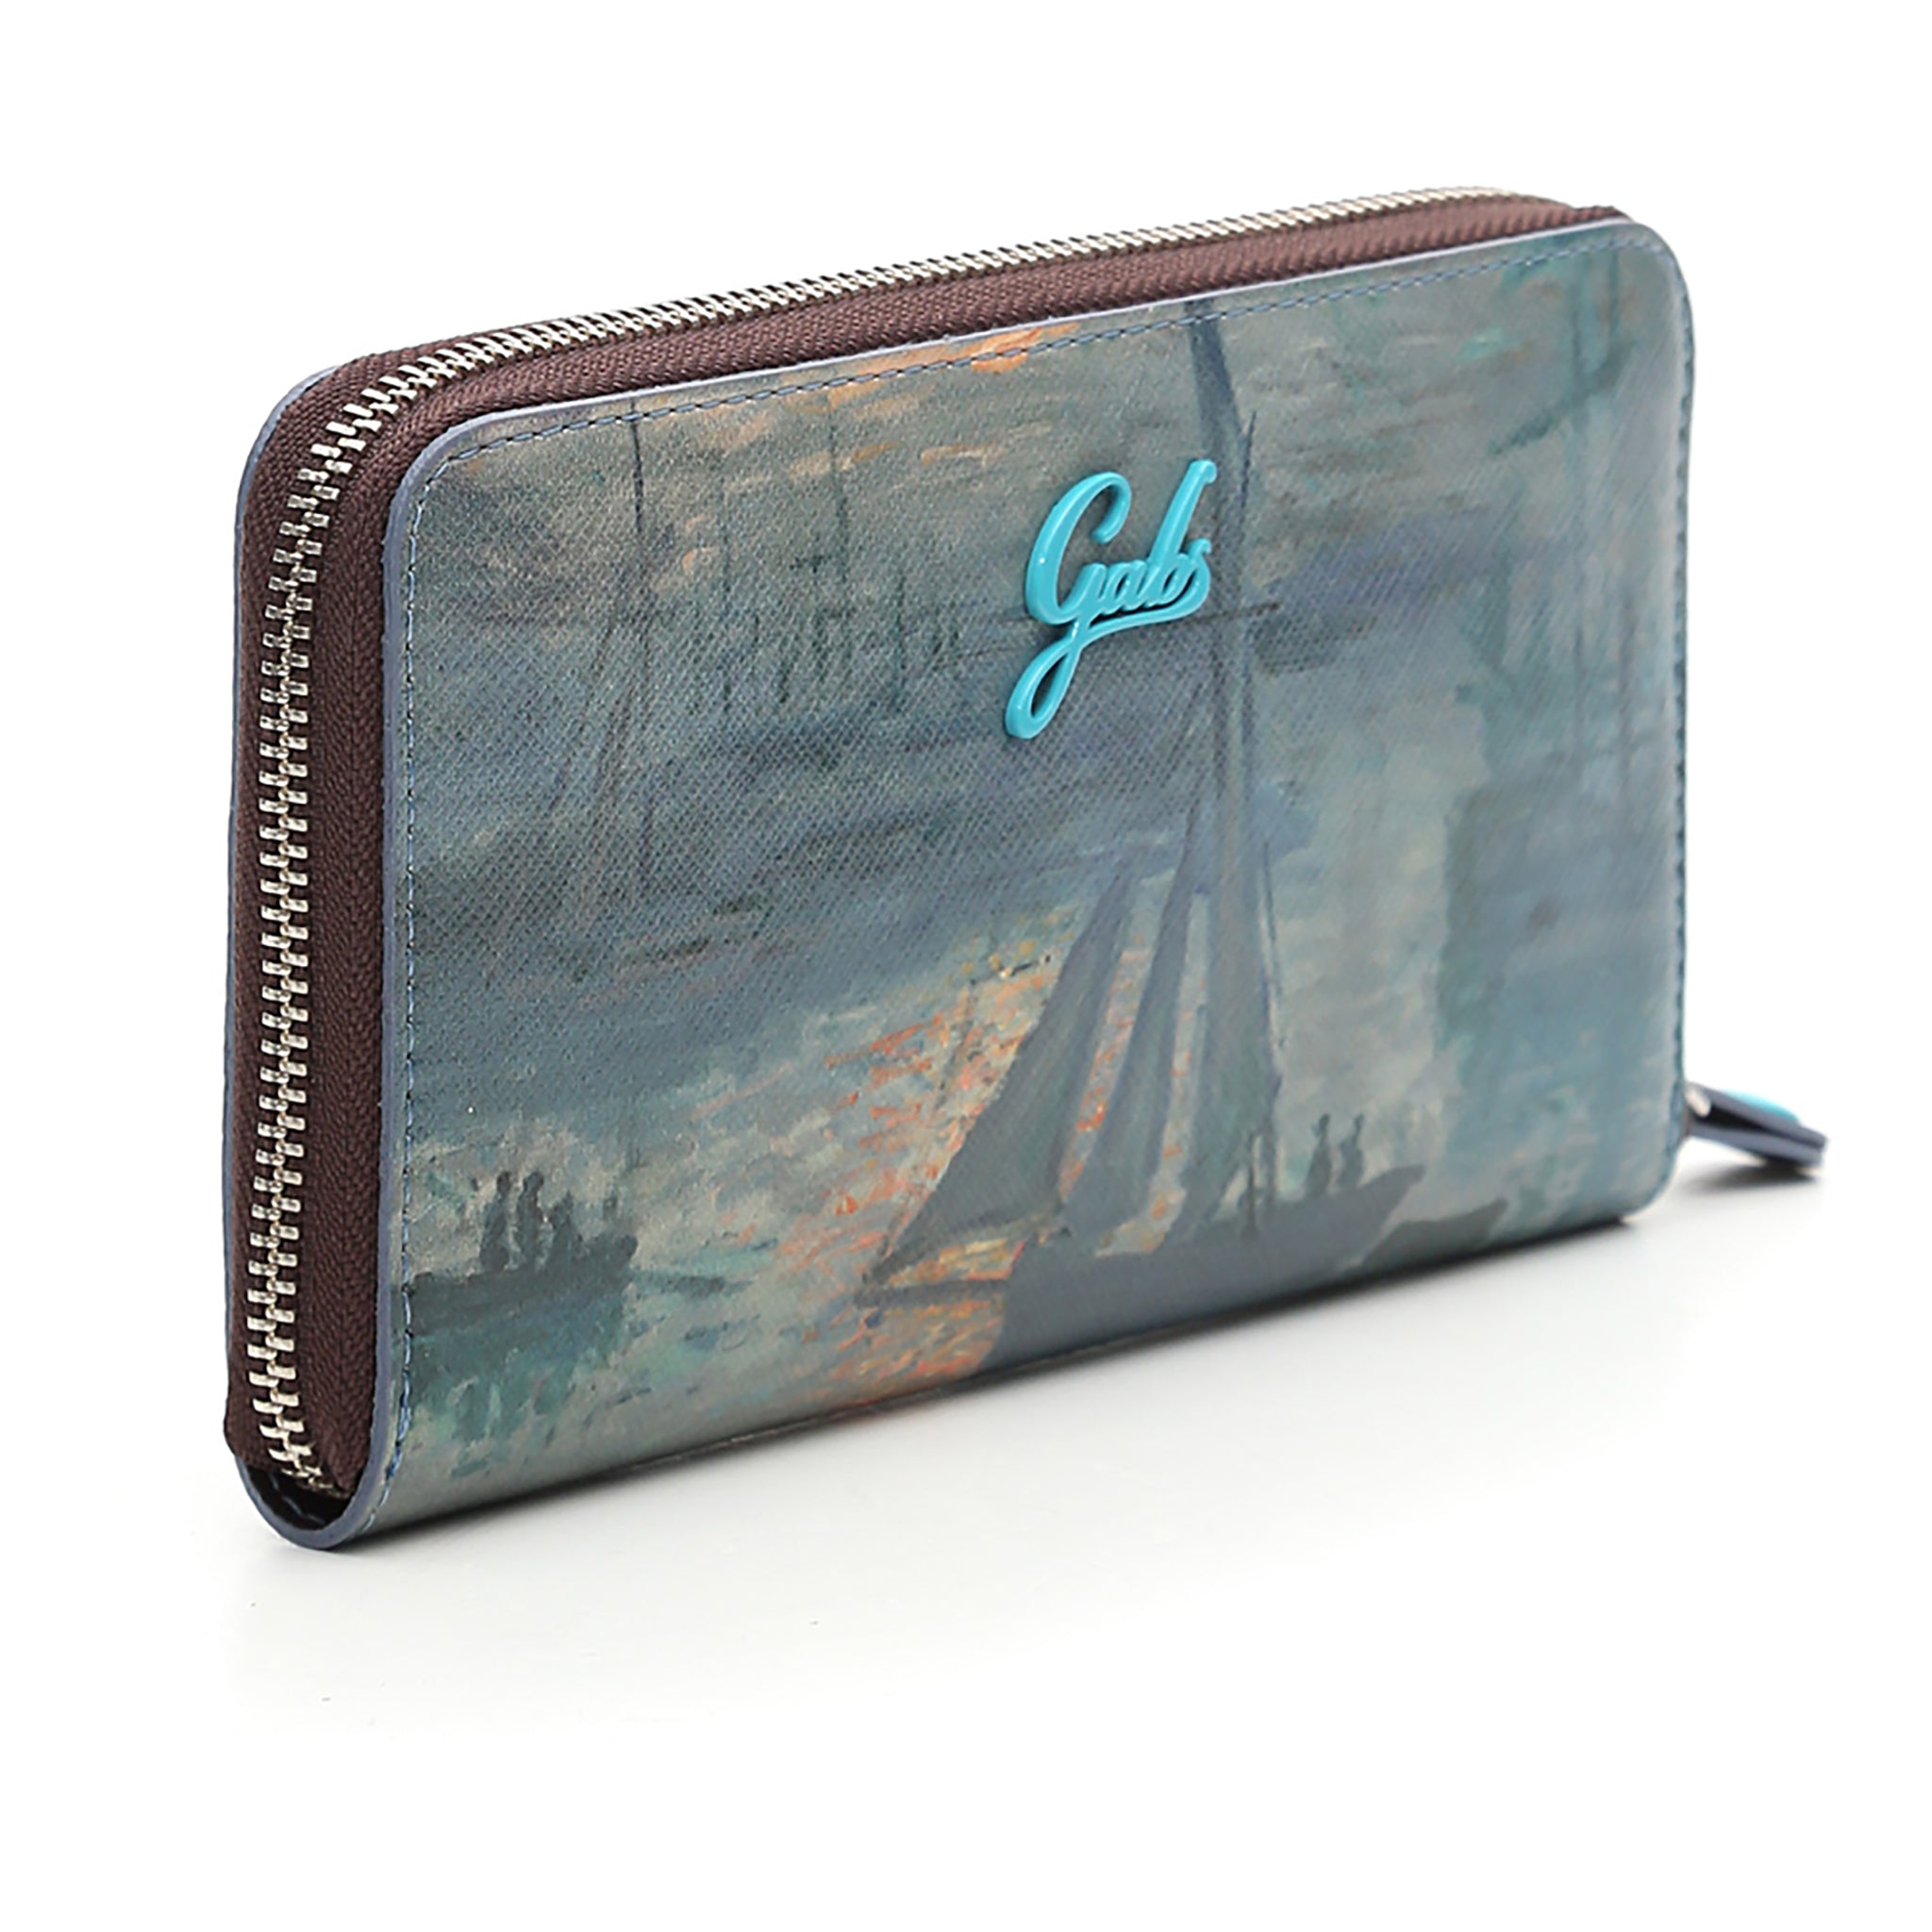 Getty Wallet Featuring Monet's Sunrise (Marine) by Gabs, Italy